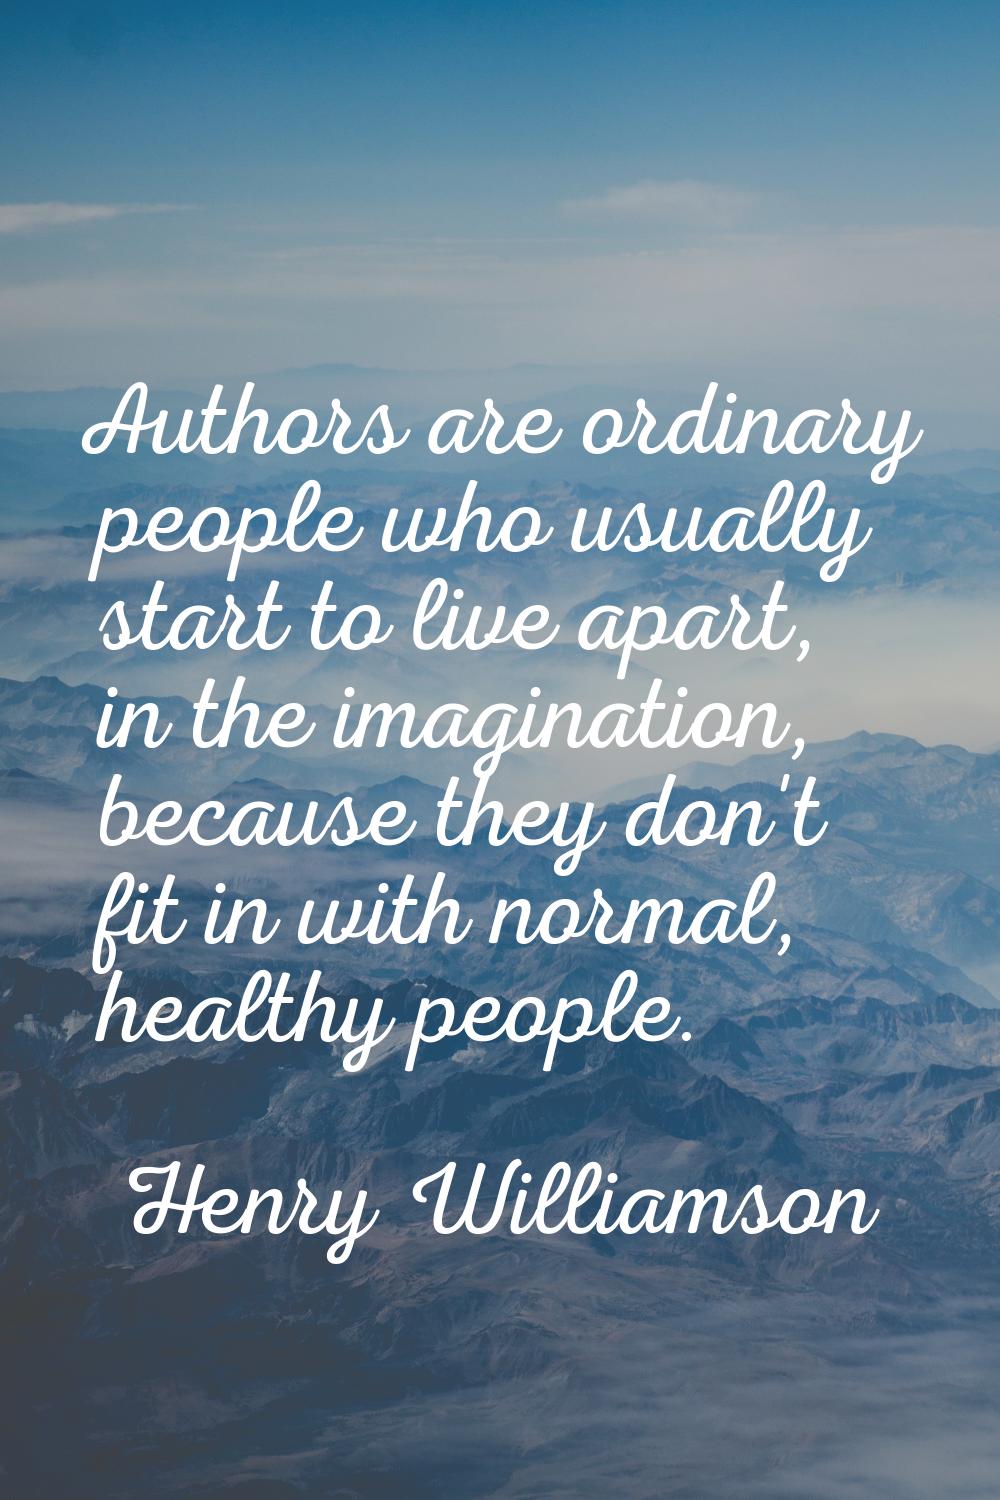 Authors are ordinary people who usually start to live apart, in the imagination, because they don't